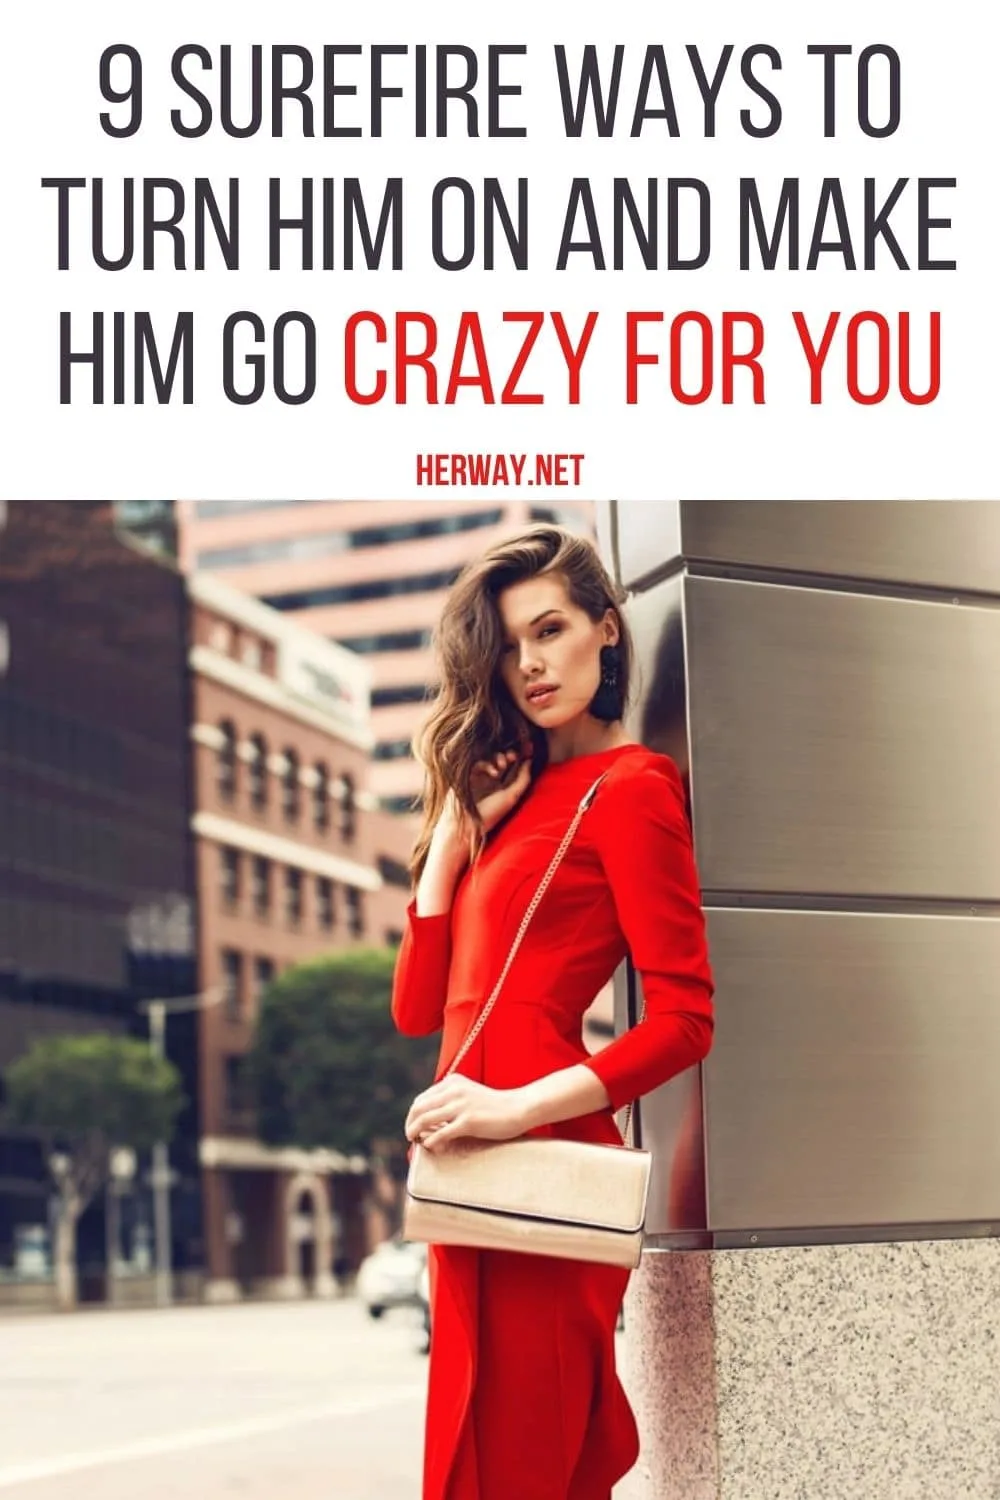 How to get a guy crazy over you